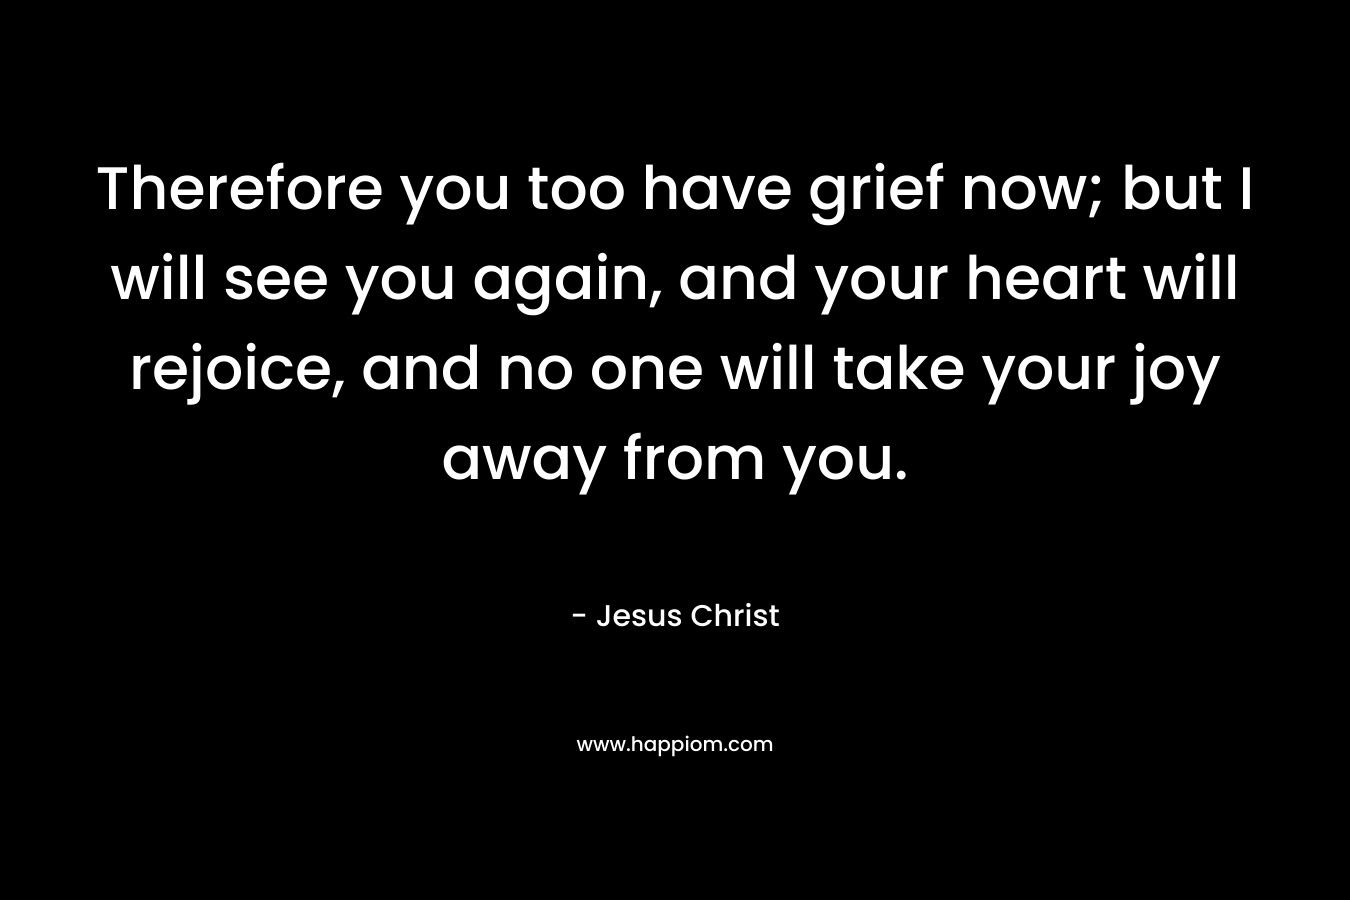 Therefore you too have grief now; but I will see you again, and your heart will rejoice, and no one will take your joy away from you. – Jesus Christ